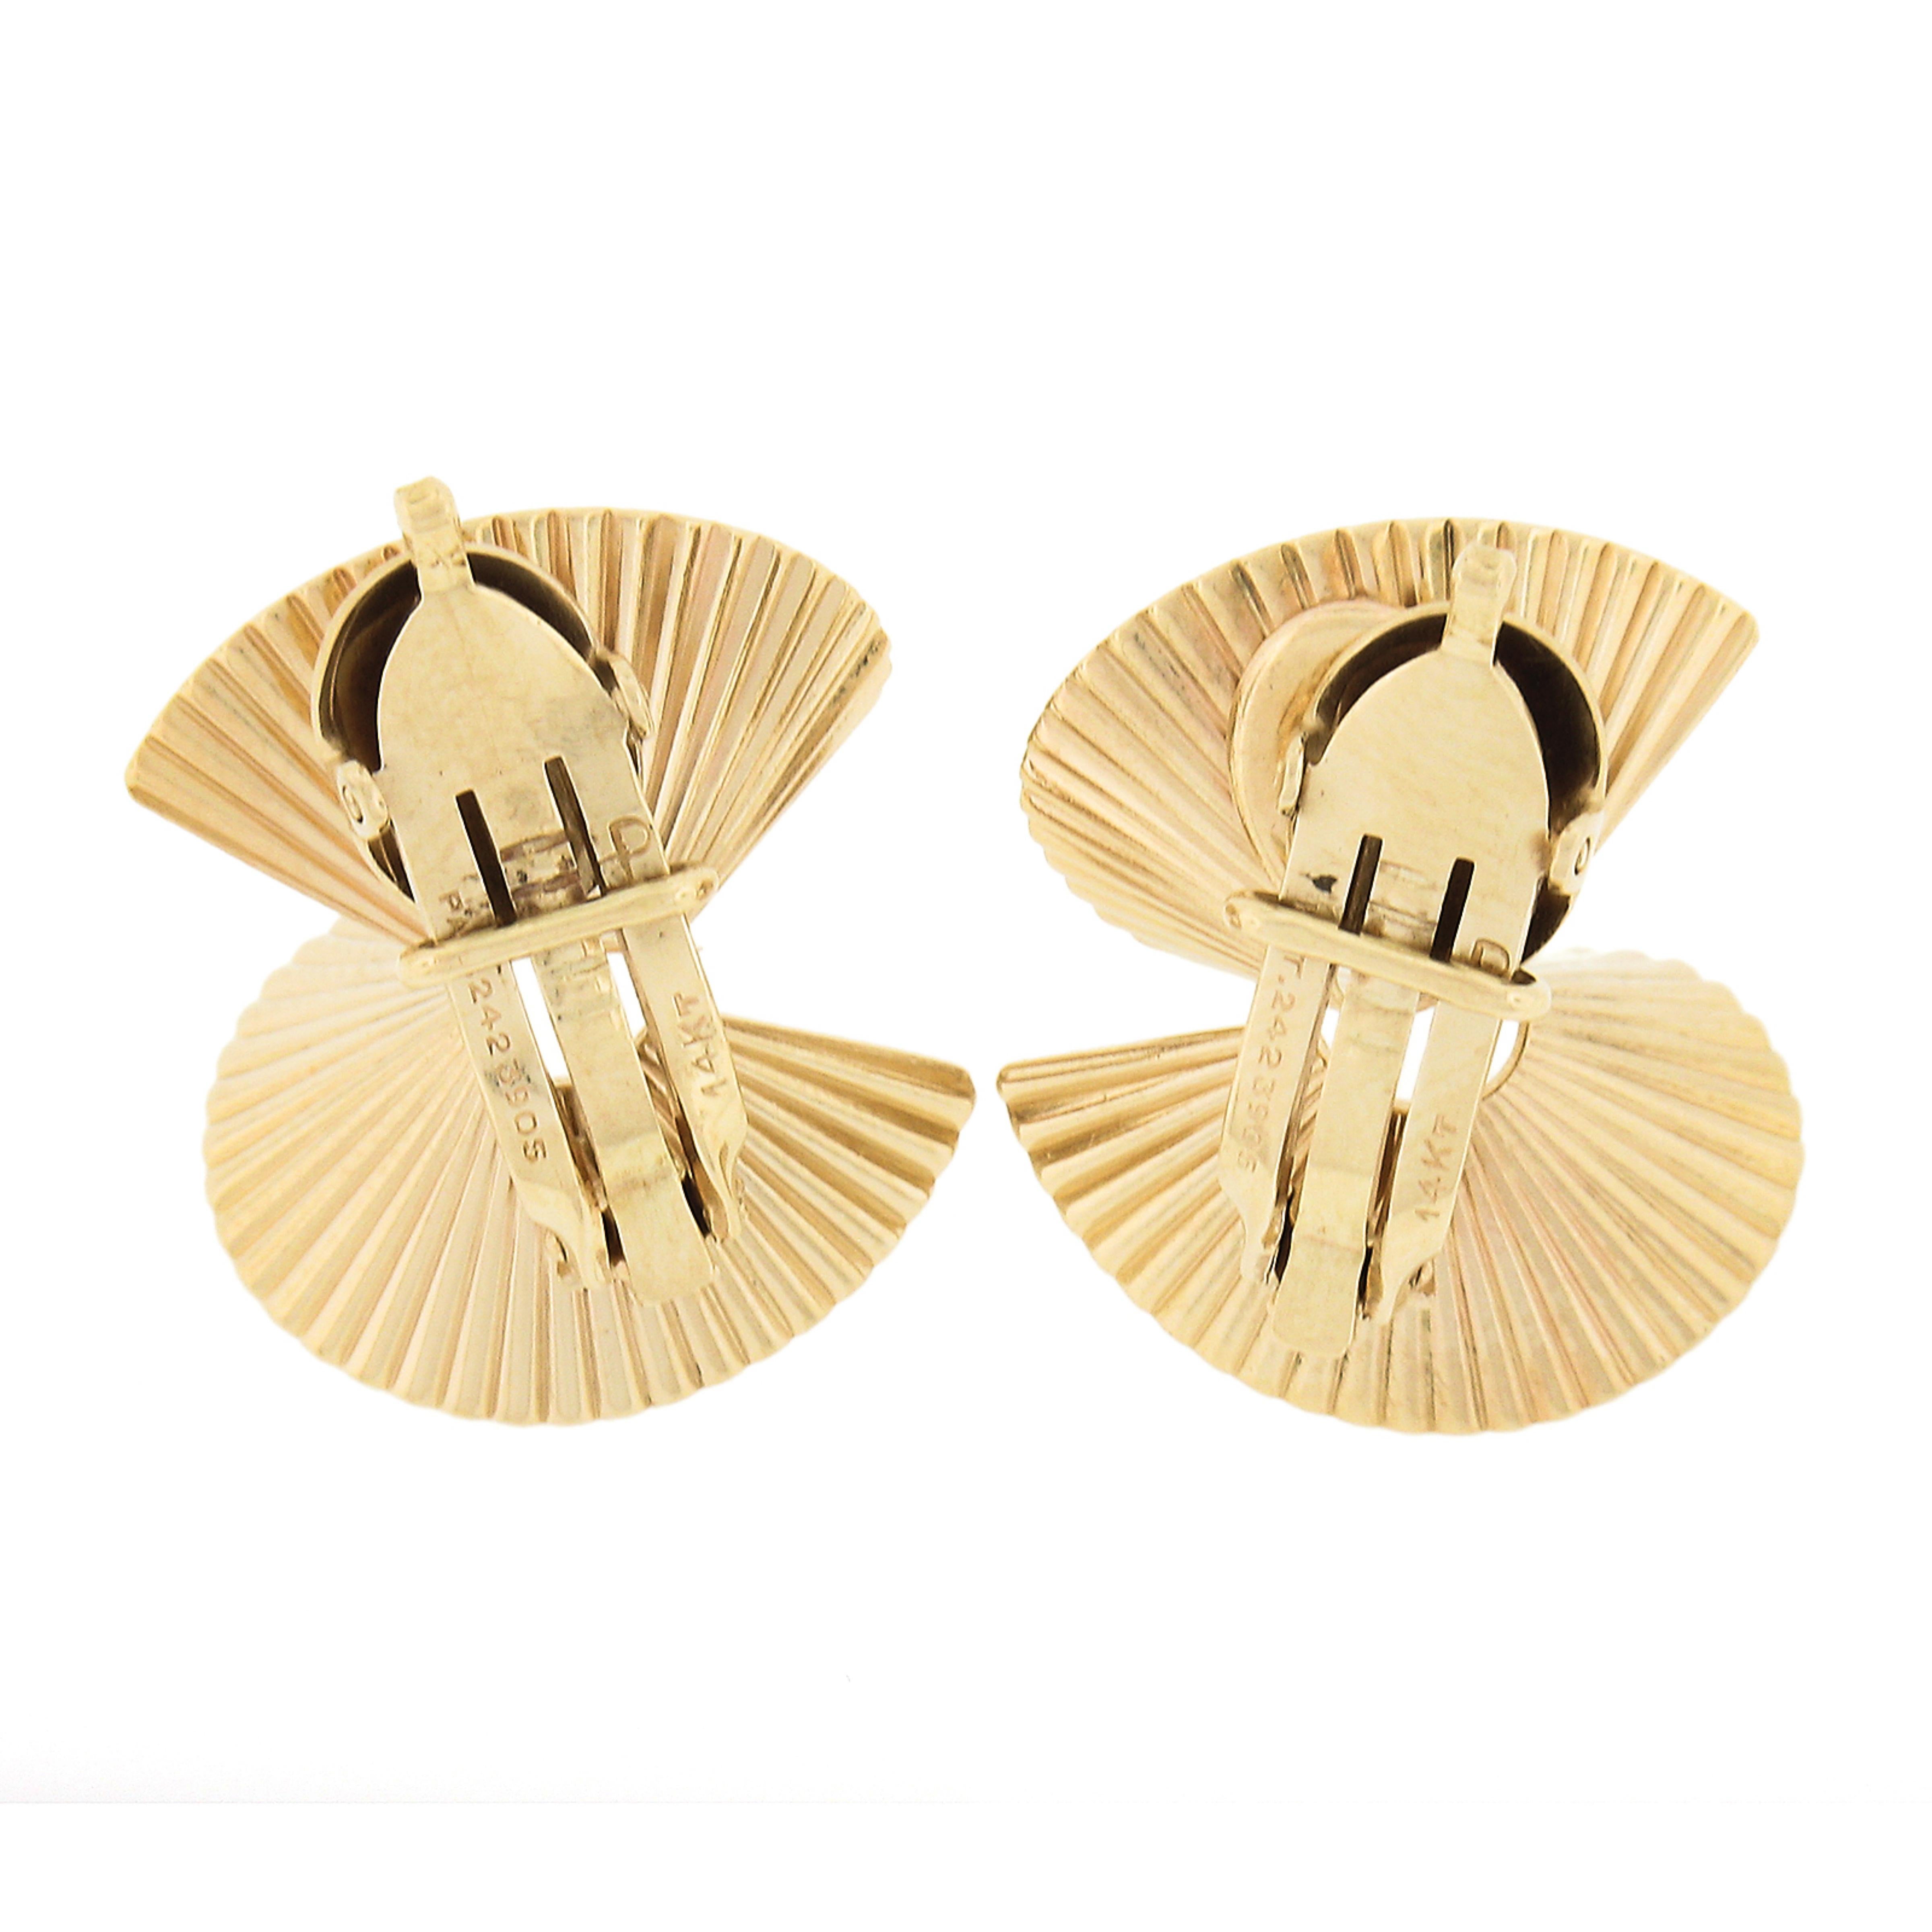 Vintage Retro 14K Yellow Gold Polished Grooved Fluted Twisted Clip On Earrings In Good Condition For Sale In Montclair, NJ